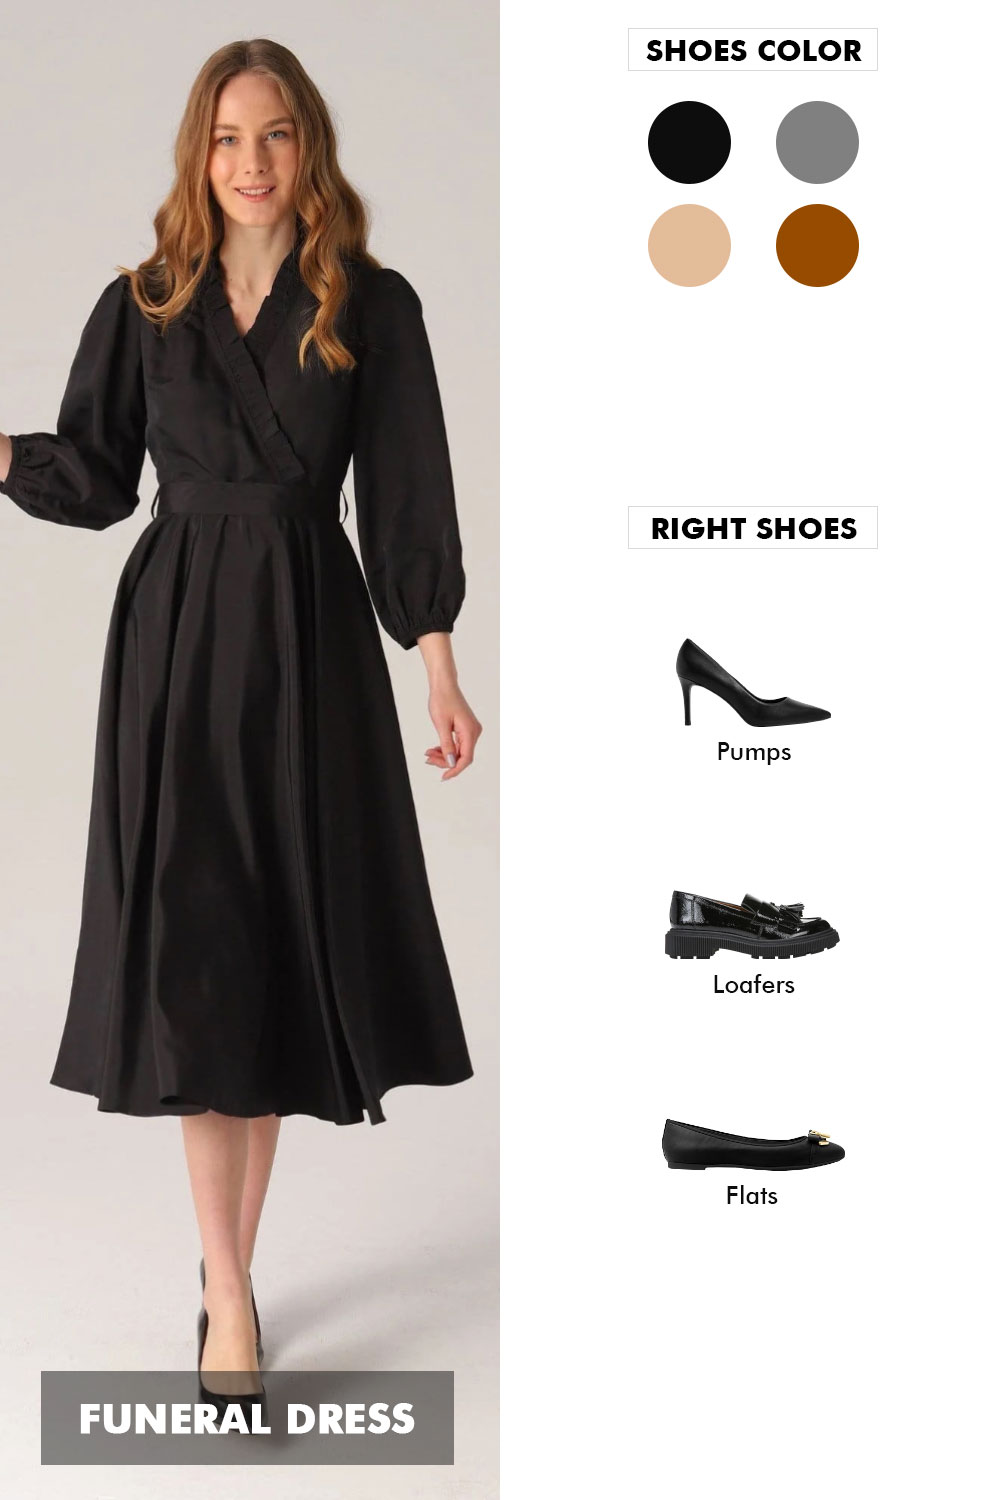 what shoes will go with a black dress